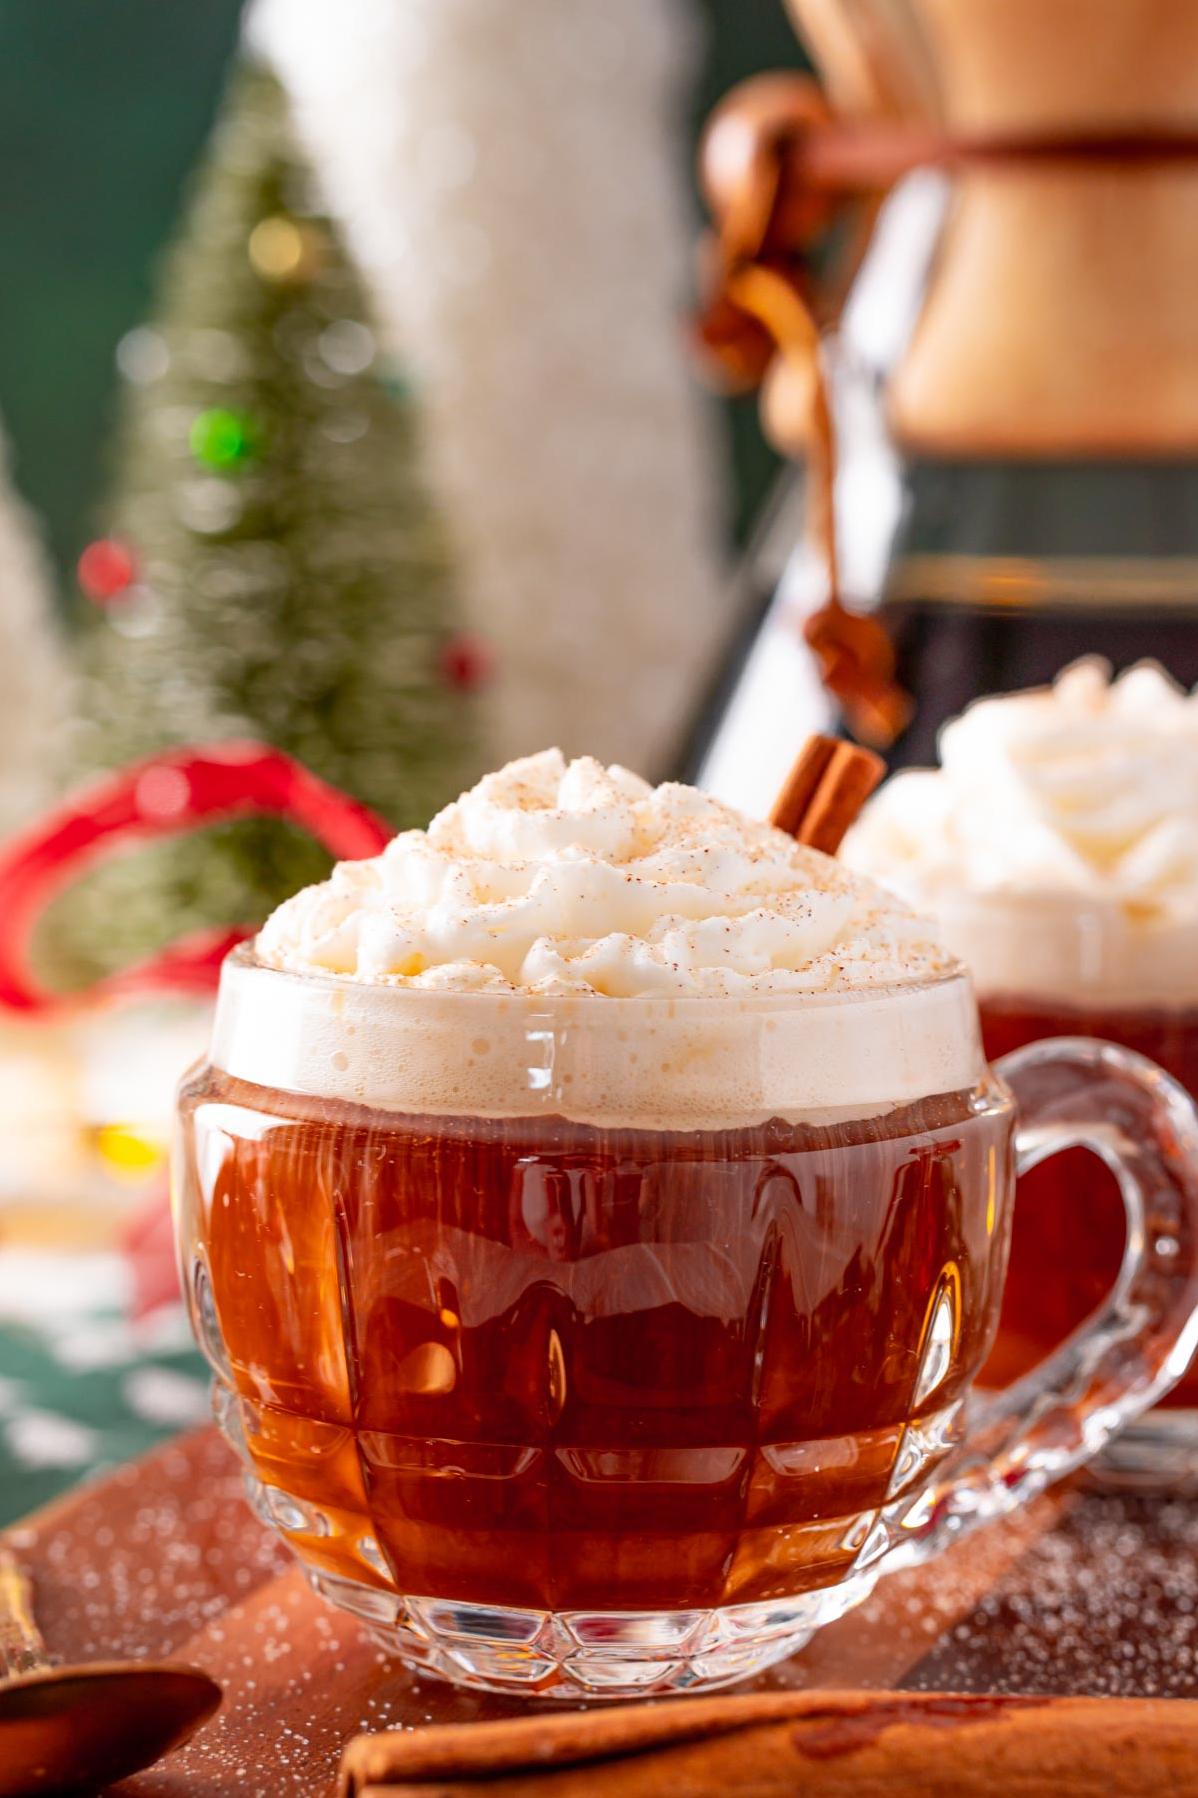  Elevate your coffee game with this festive and flavorful recipe.